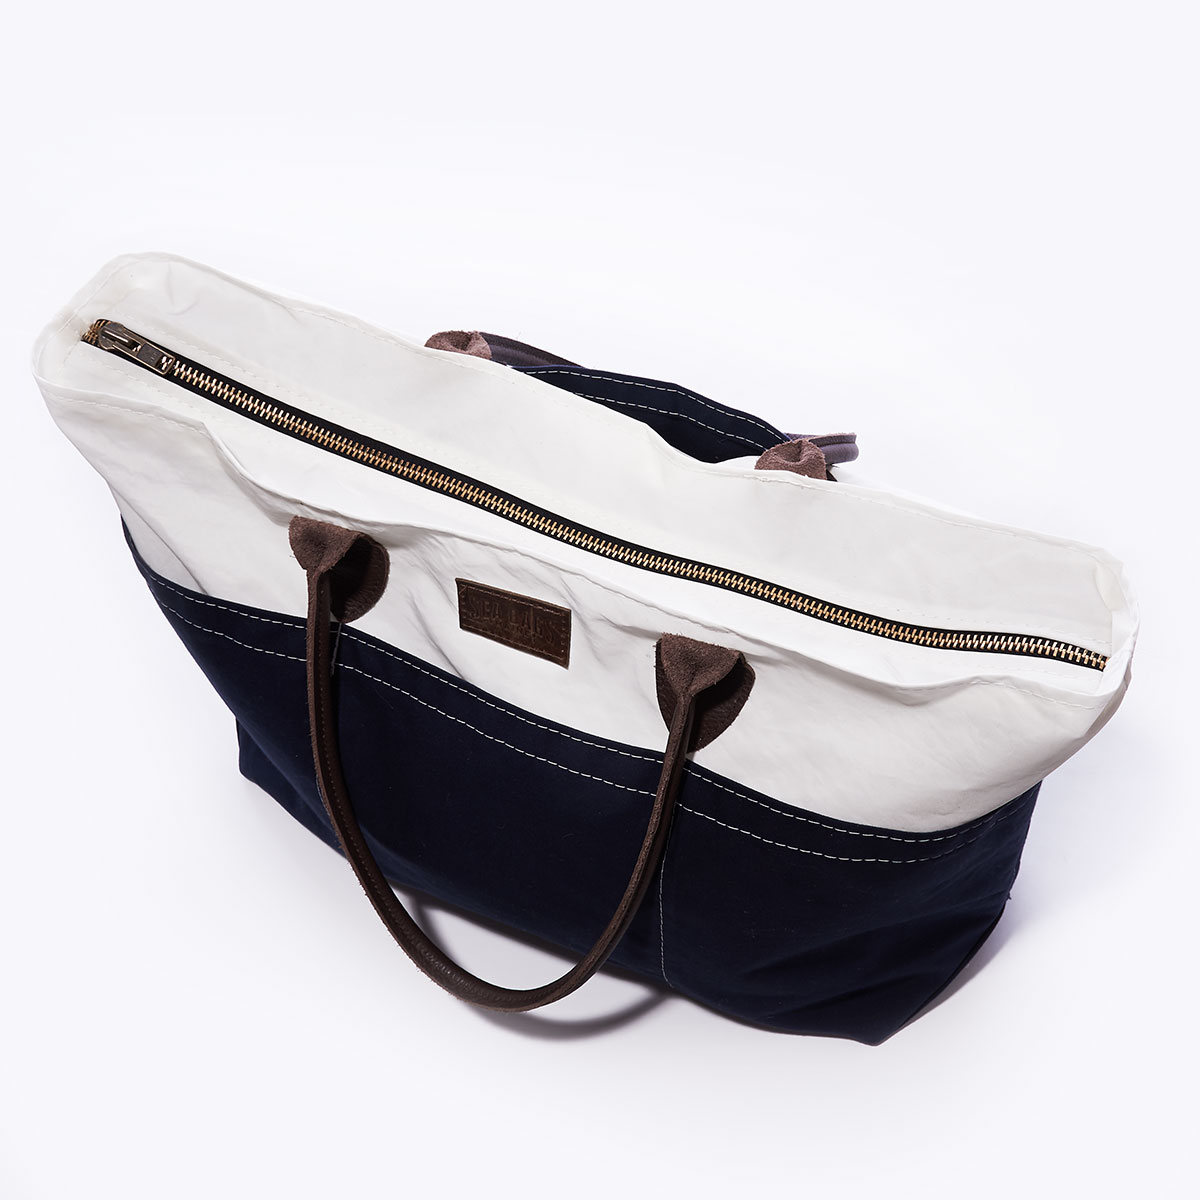 zippered closure of recycled sail cloth and navy canvas tote with rolled brown leather handles